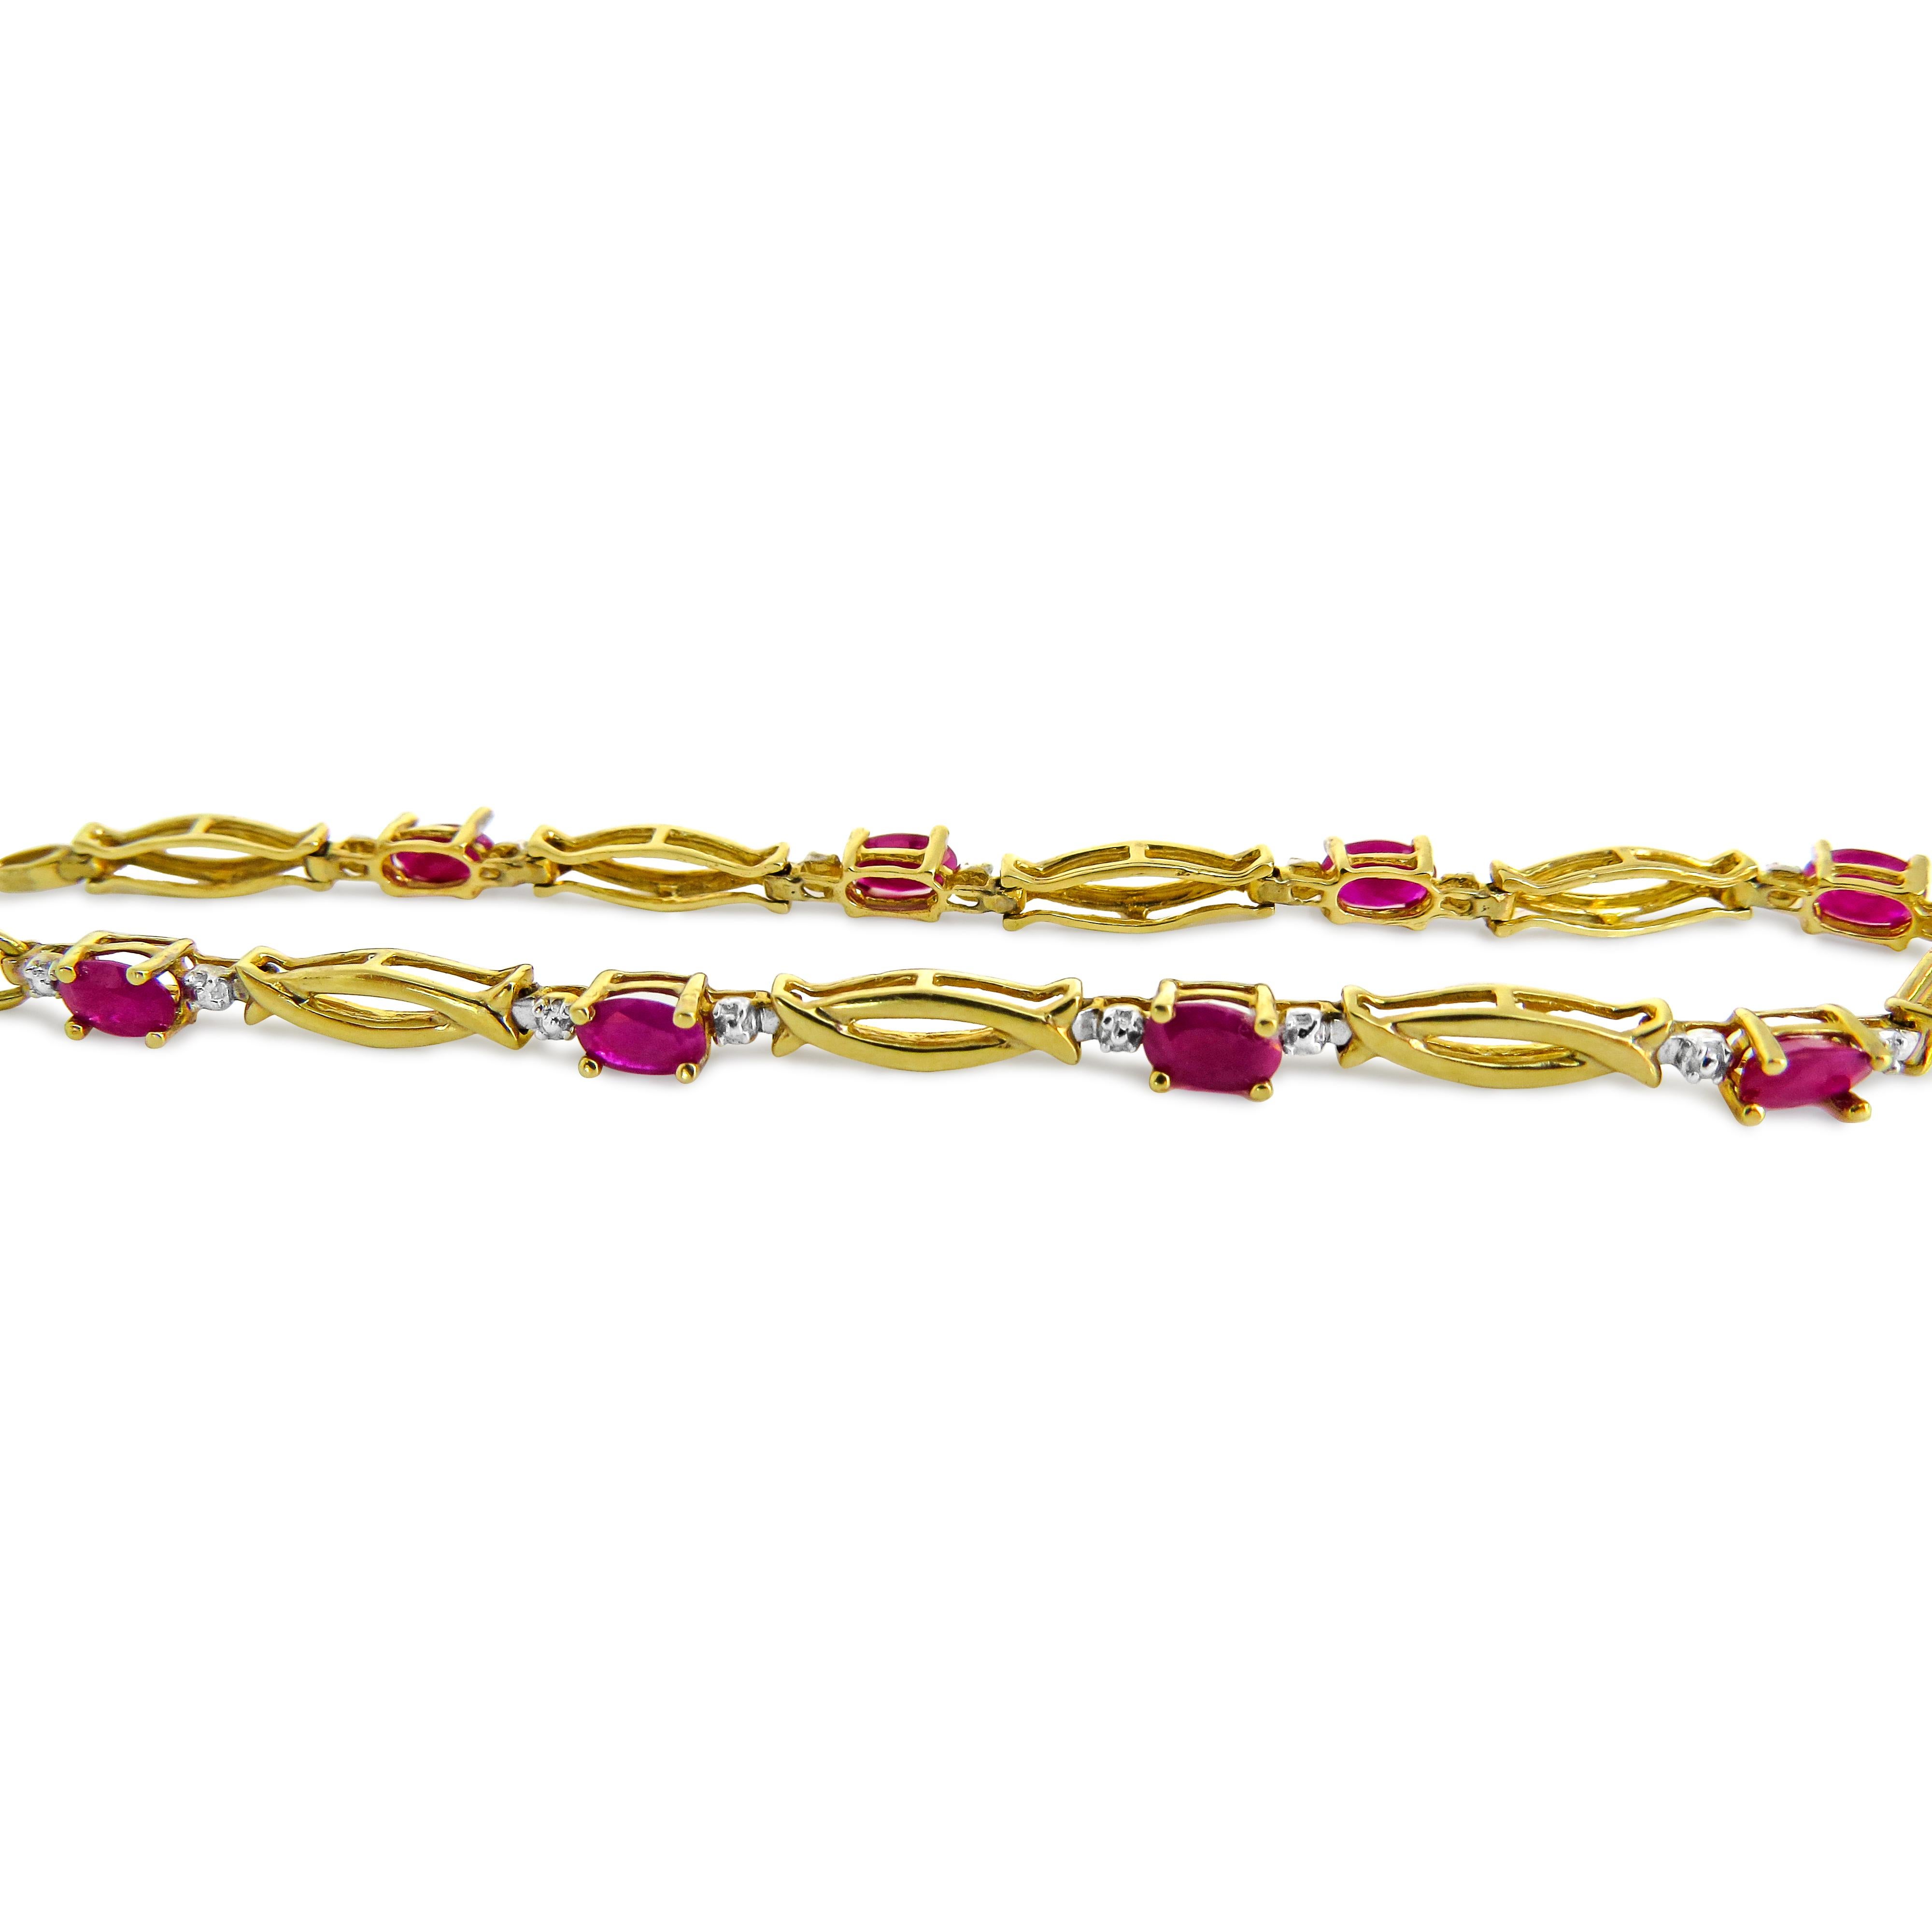 14K Yellow Gold 
Weight= 5.2 gr 
Length= 8 Inches  
Ruby= 2 Ct total 
Diamond= 0.16 Ct total 
Year= 2000 